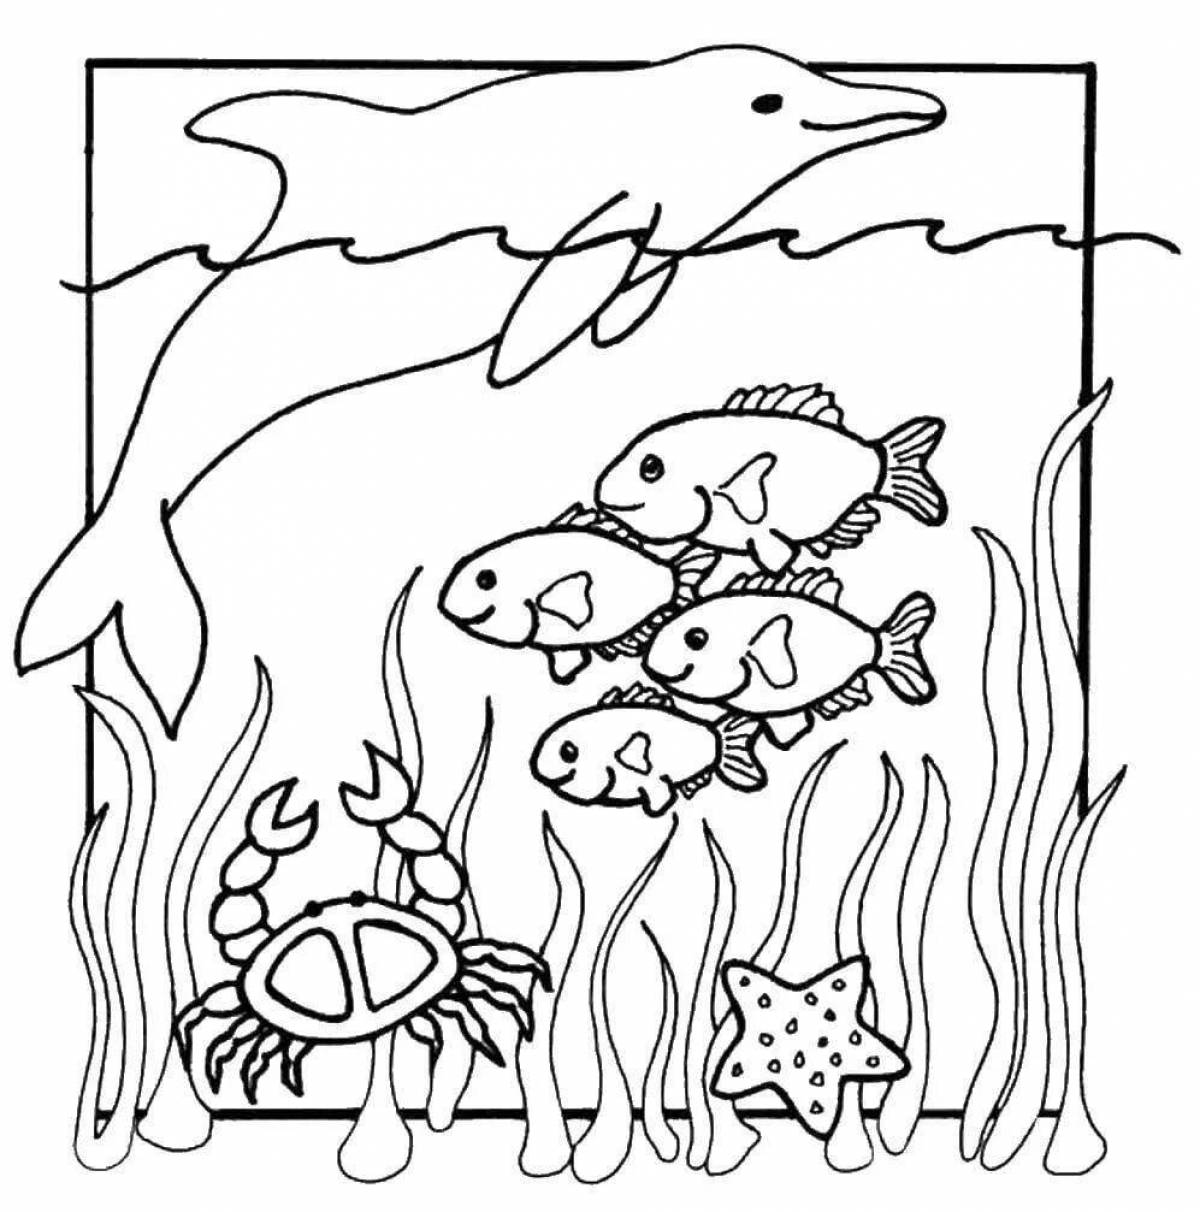 Shine water children's world coloring book